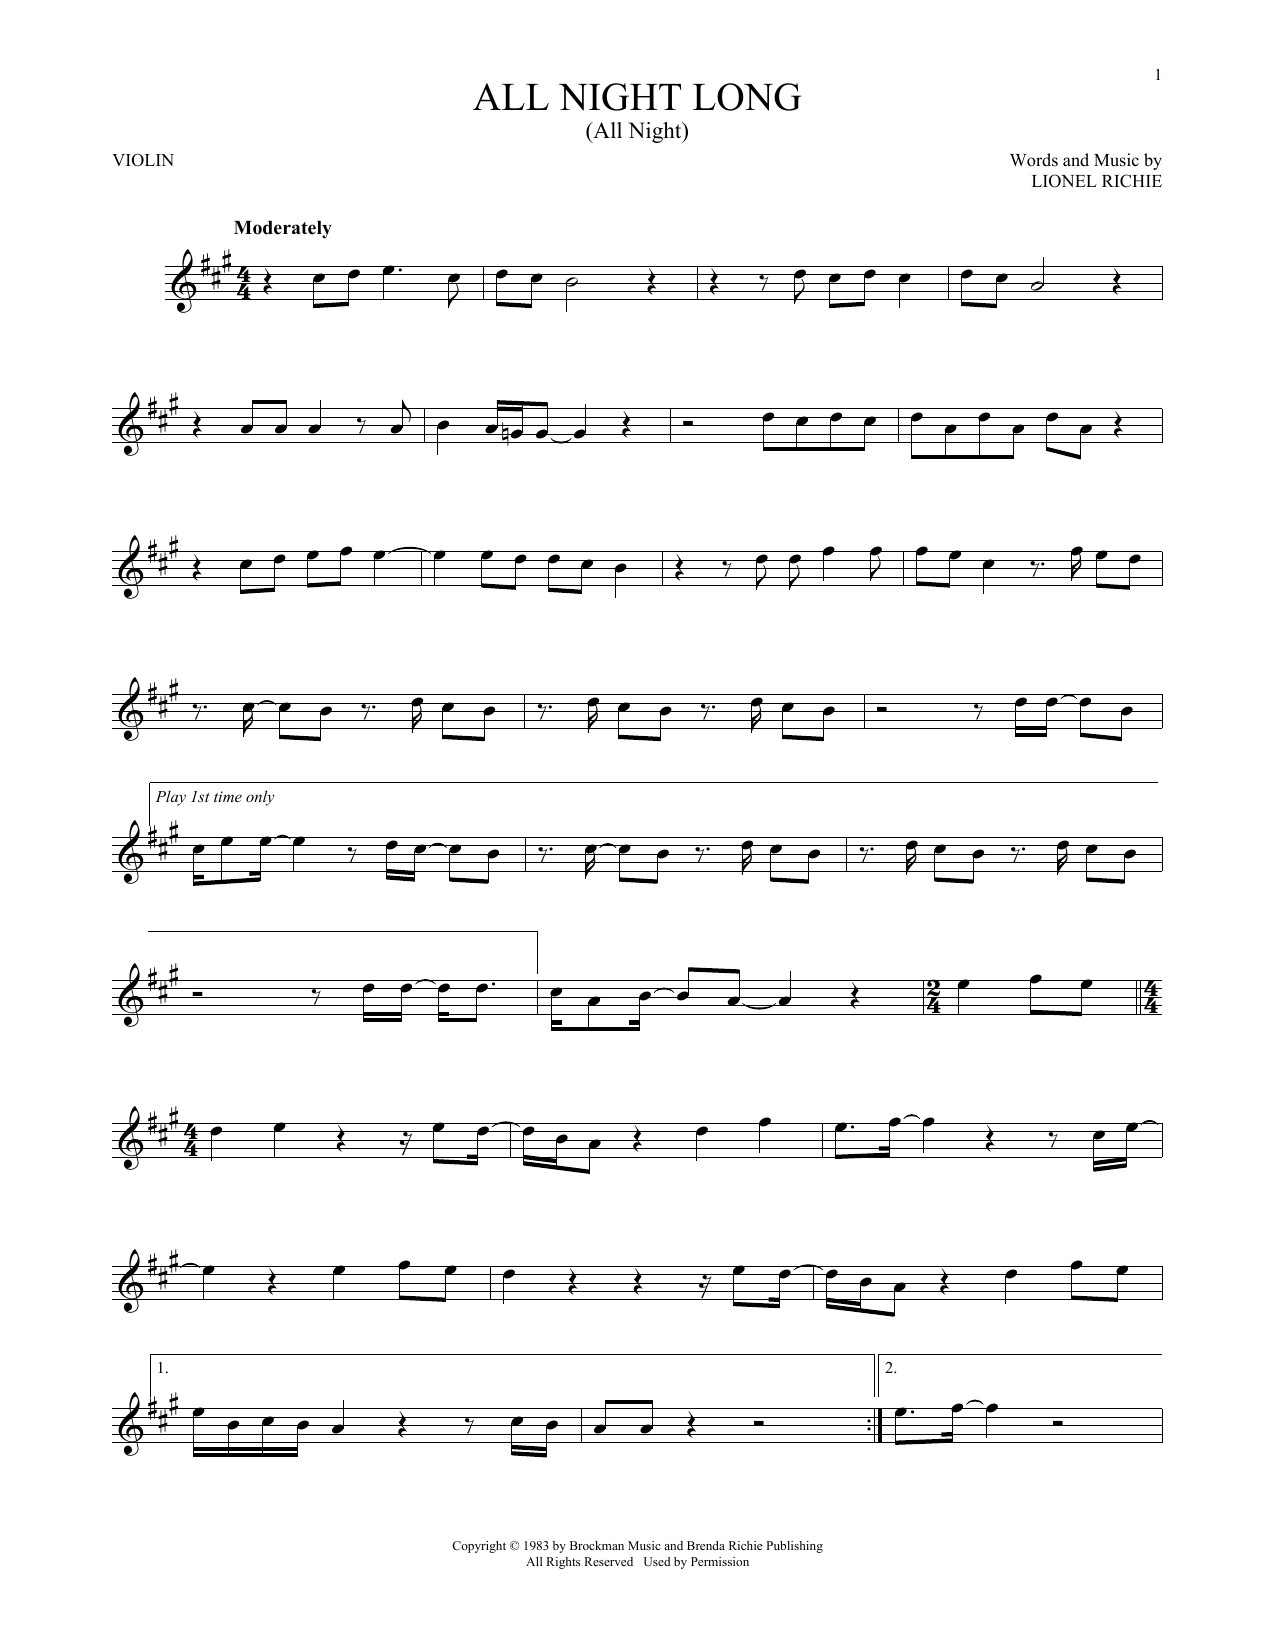 Download Lionel Richie All Night Long (All Night) Sheet Music